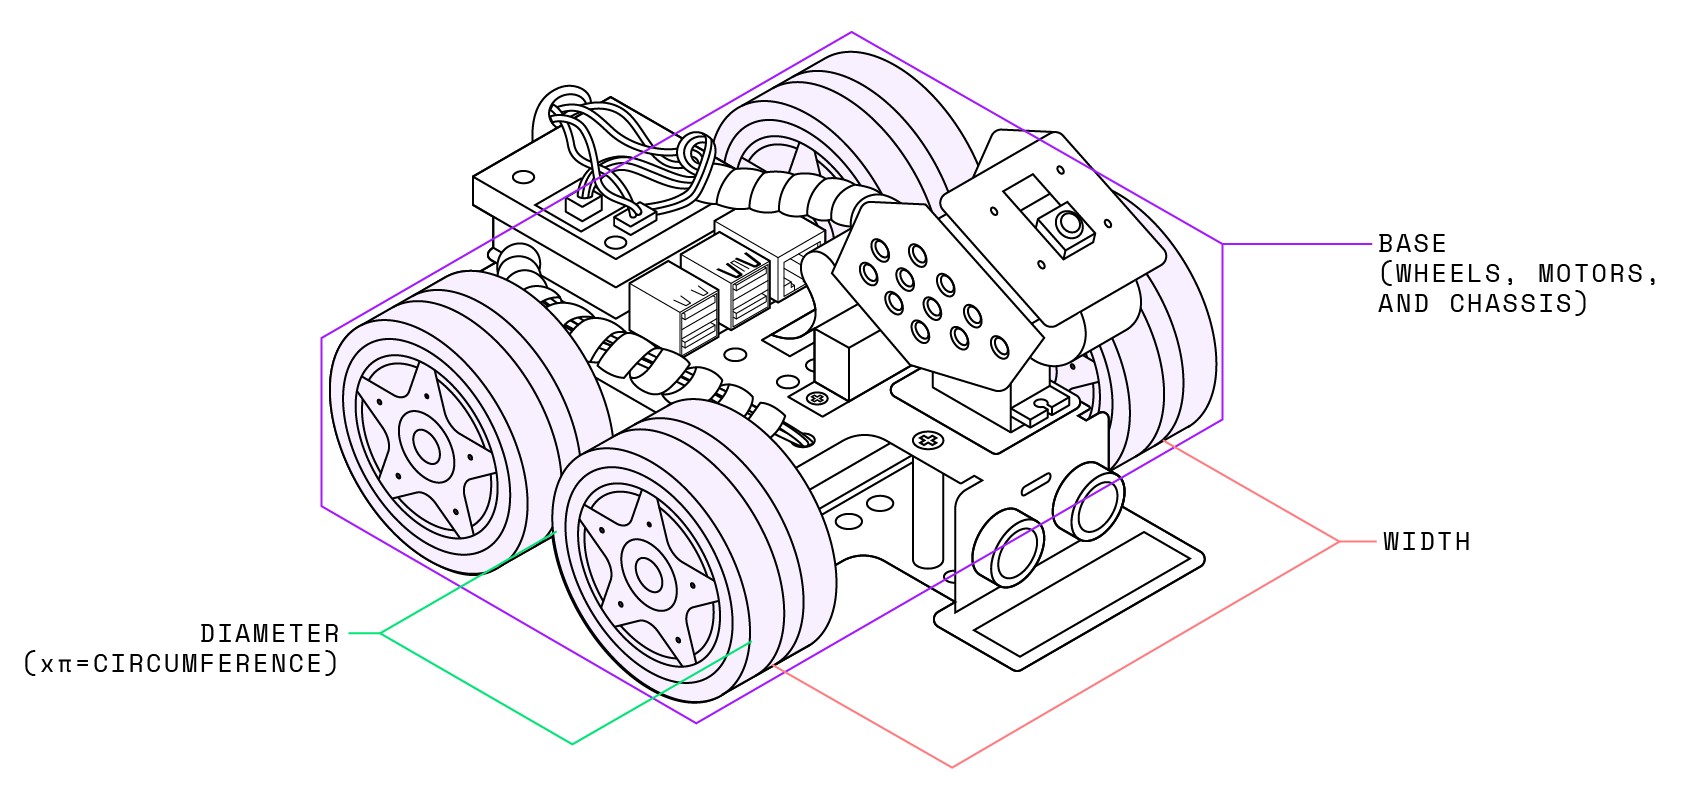 A robot comprised of a wheeled base (motors, wheels and chassis) as well as some other components. The wheels are highlighted to indicate that they are part of the concept of a ‘base’, while the non-base components are not highlighted. The width and circumference are required attributes when configuring a base component.